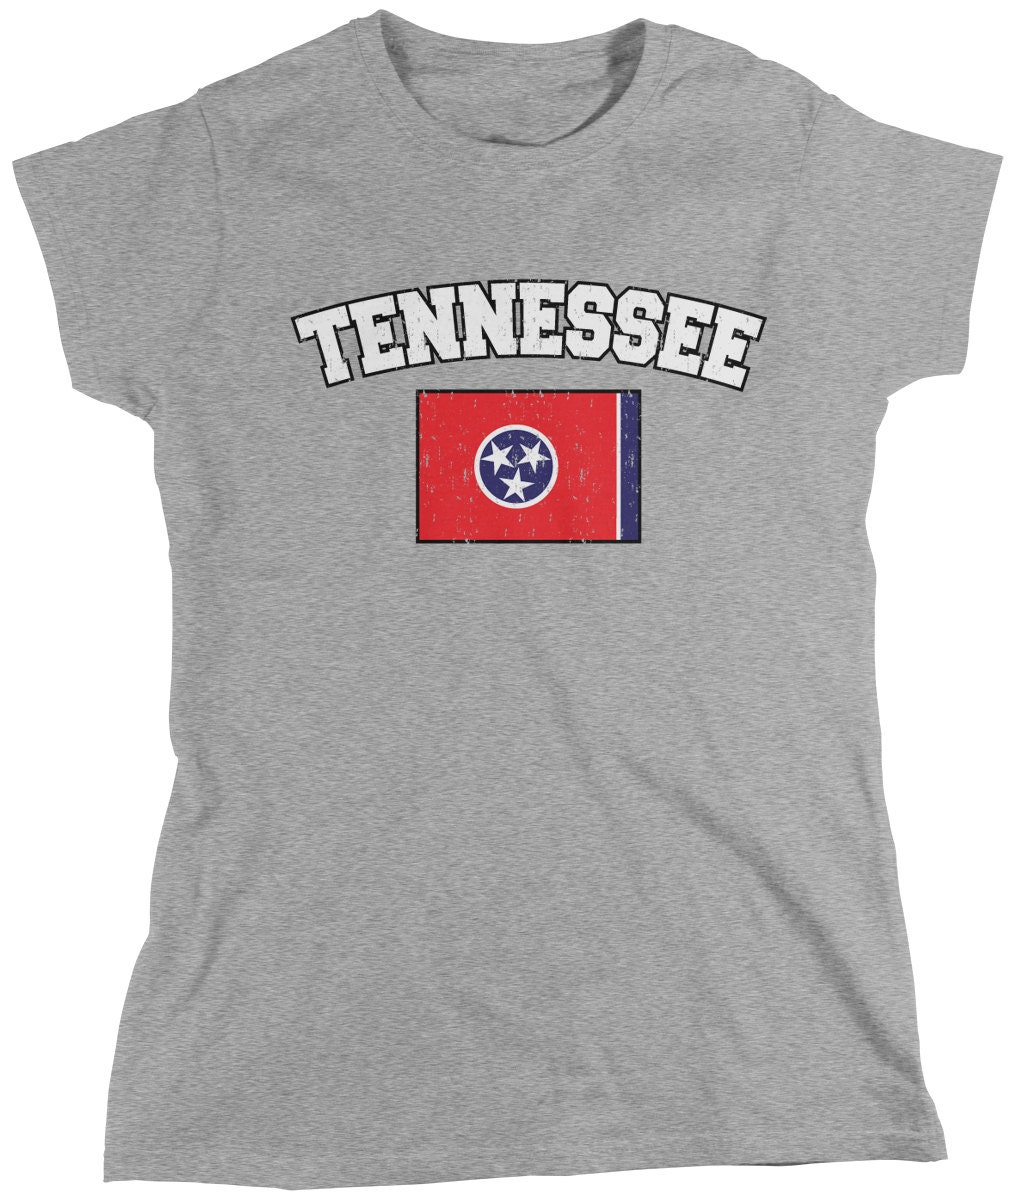 Distressed Tennessee State Flag Women's T-Shirt | Etsy